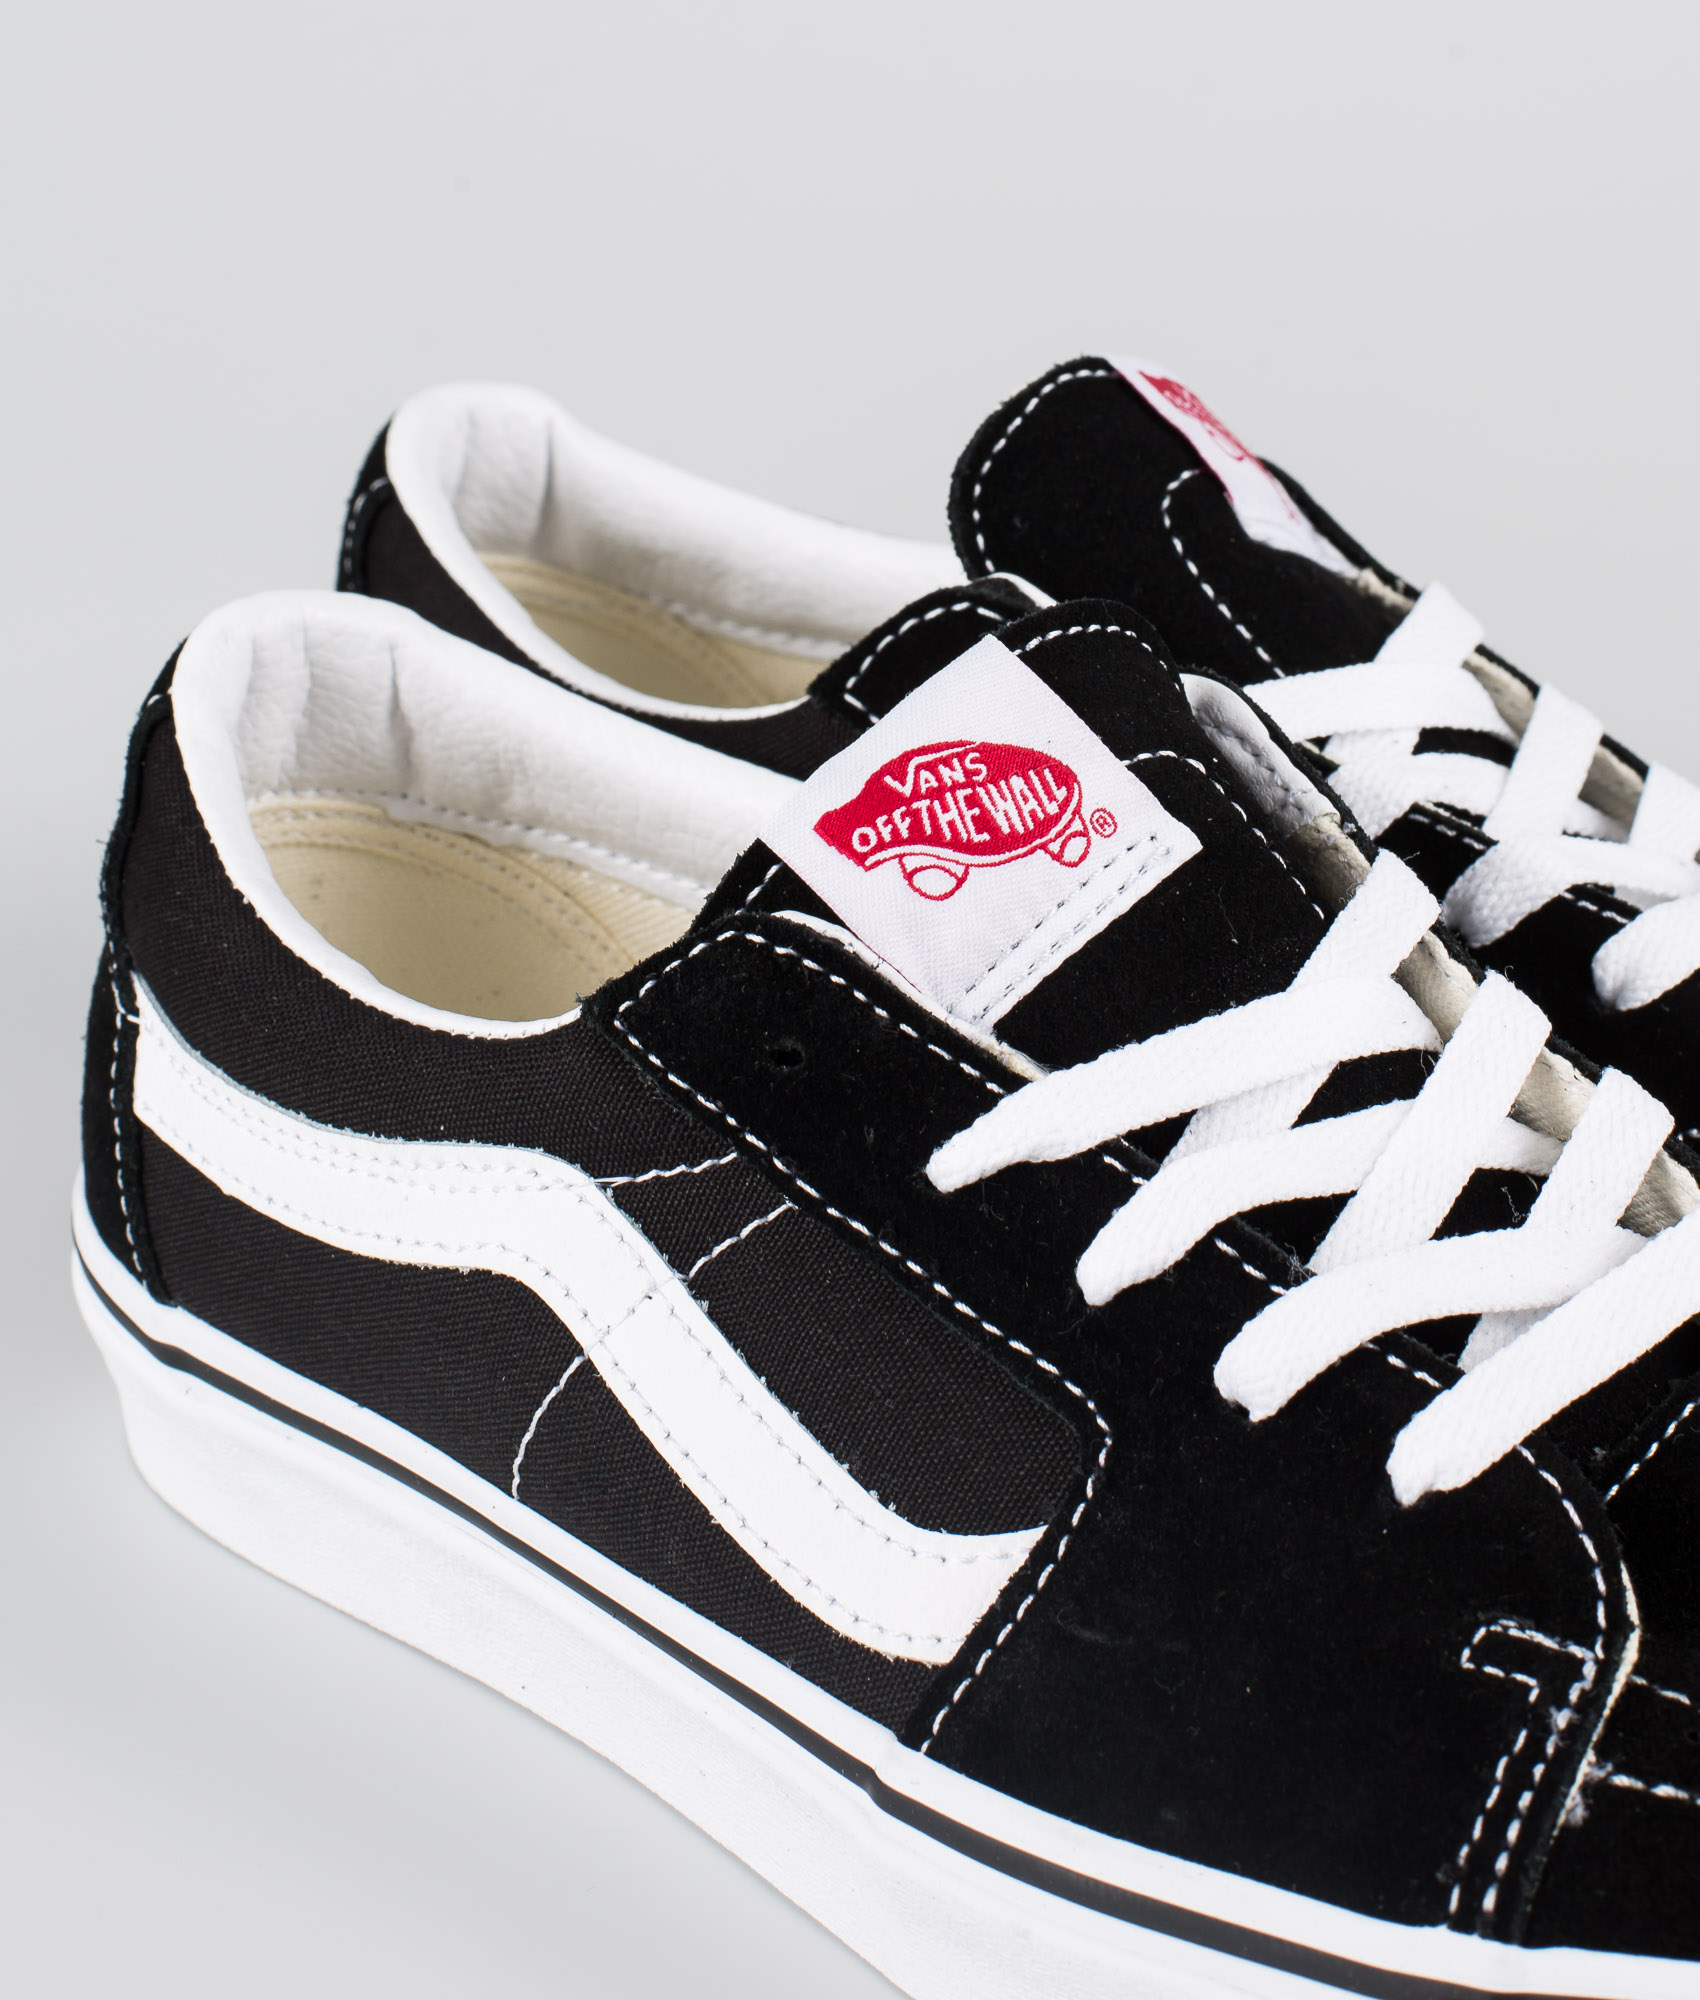 black and white vans tennis shoes